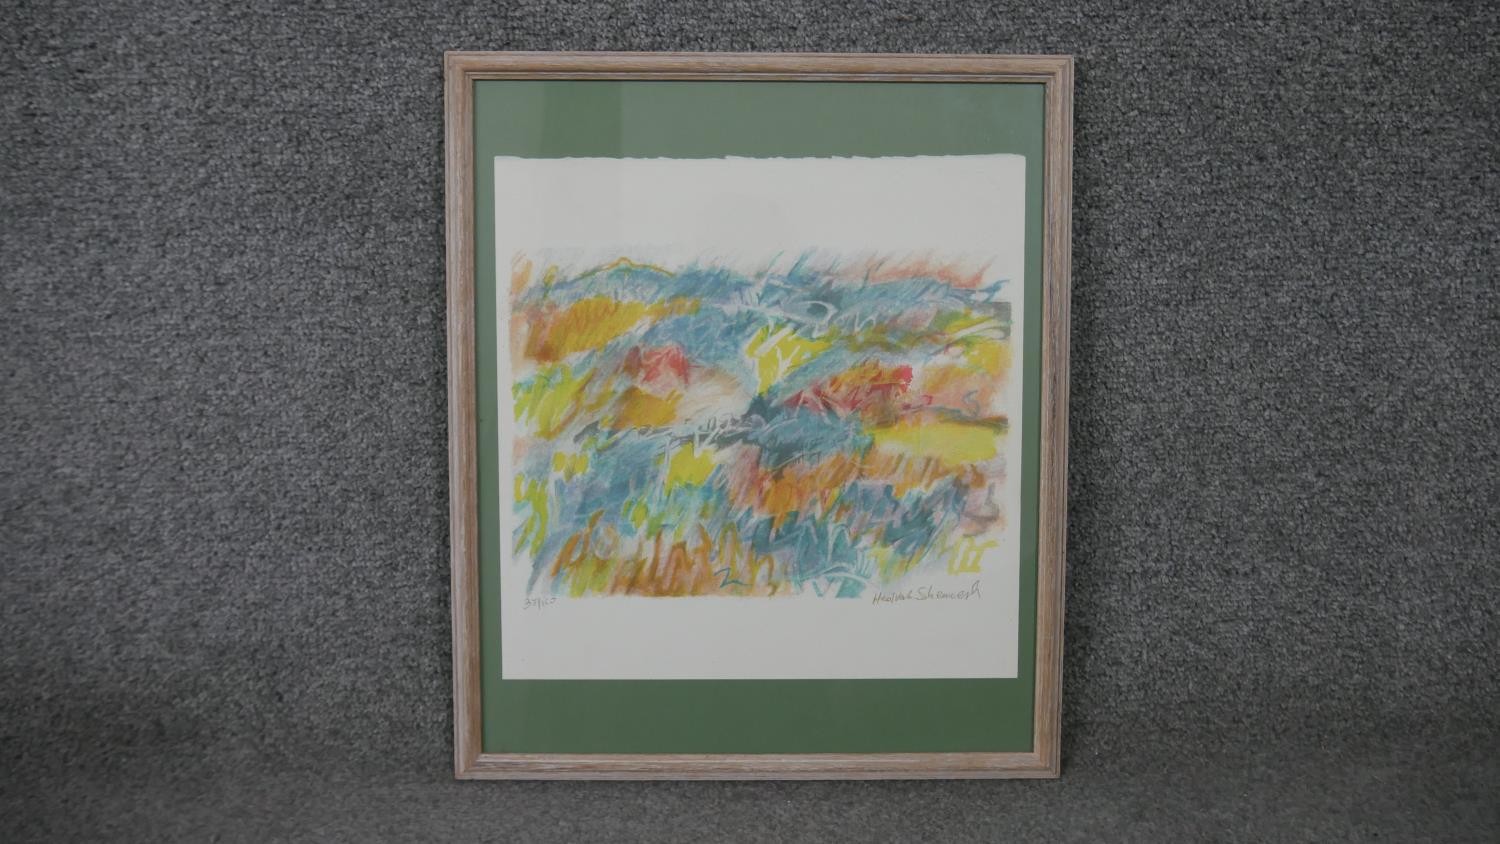 Hedvah Shemesh, coloured lithograph, colourful abstract composition, signed, edition 37/150. H.42 - Image 2 of 5